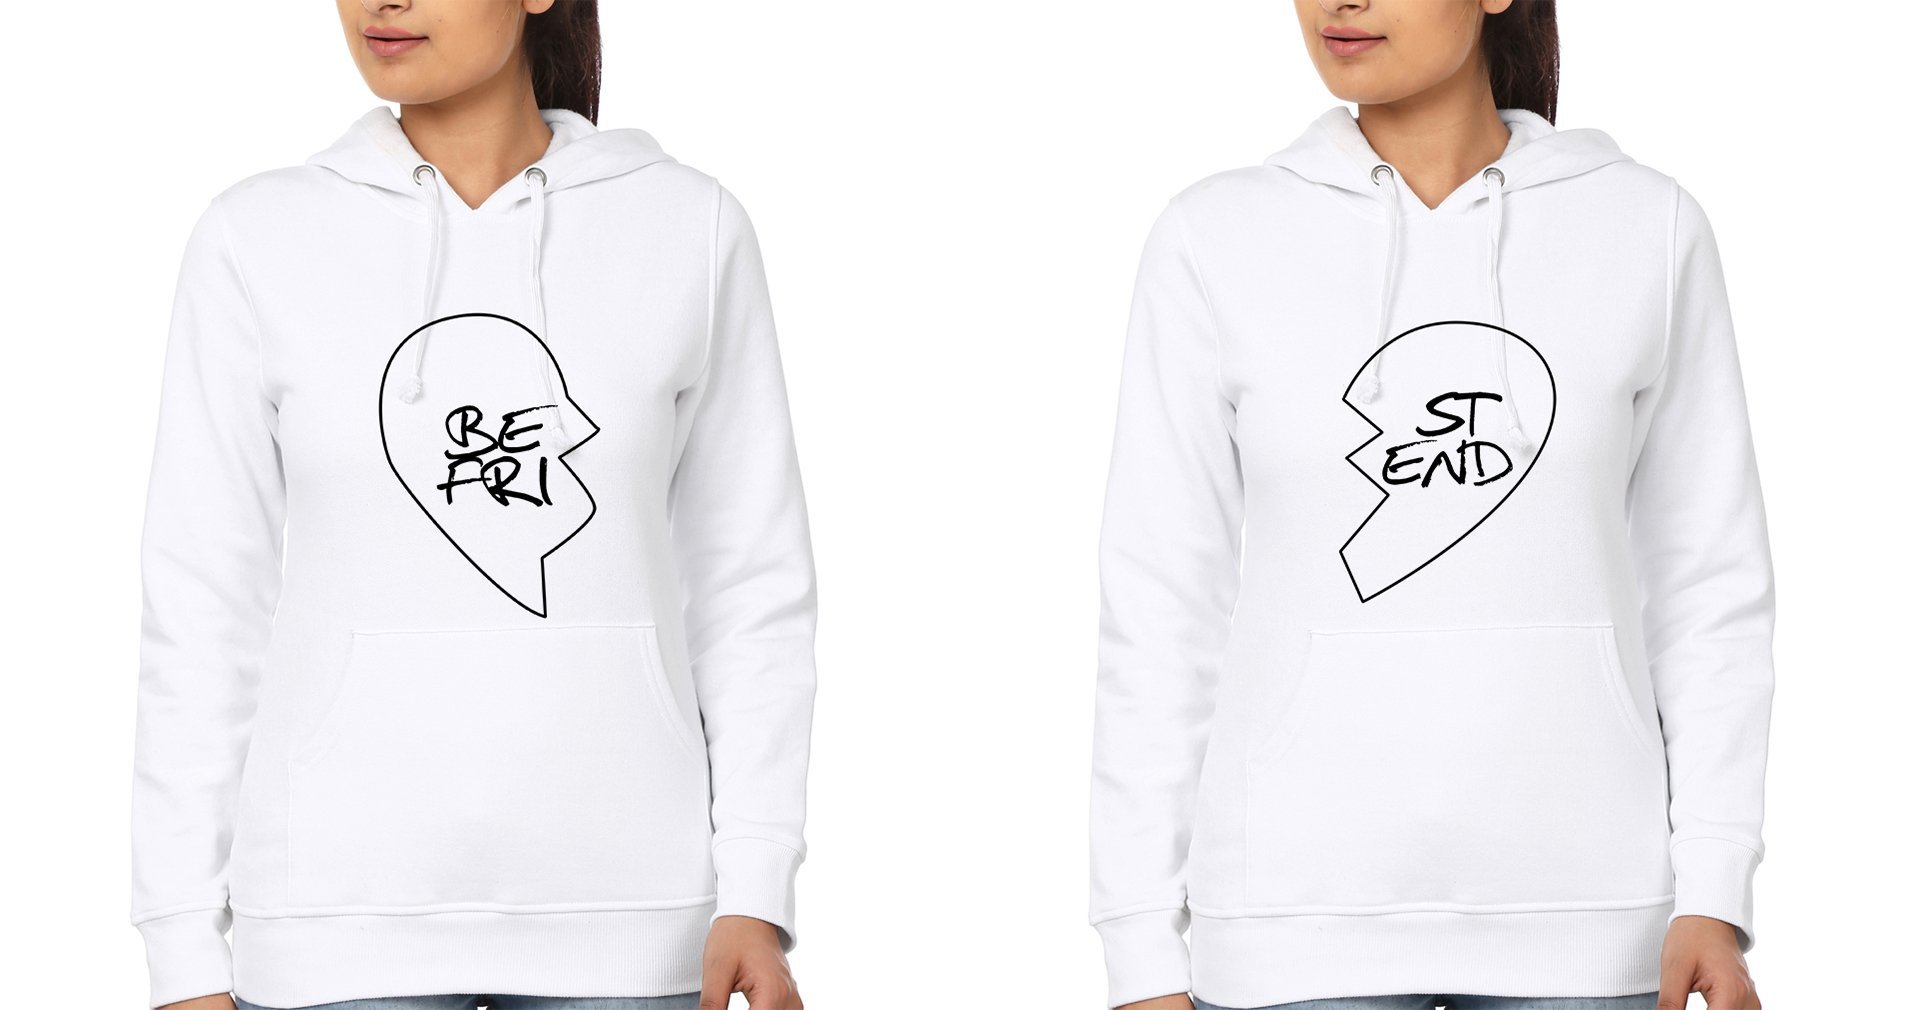 Best Friend BFF Hoodies-FunkyTradition - FunkyTradition